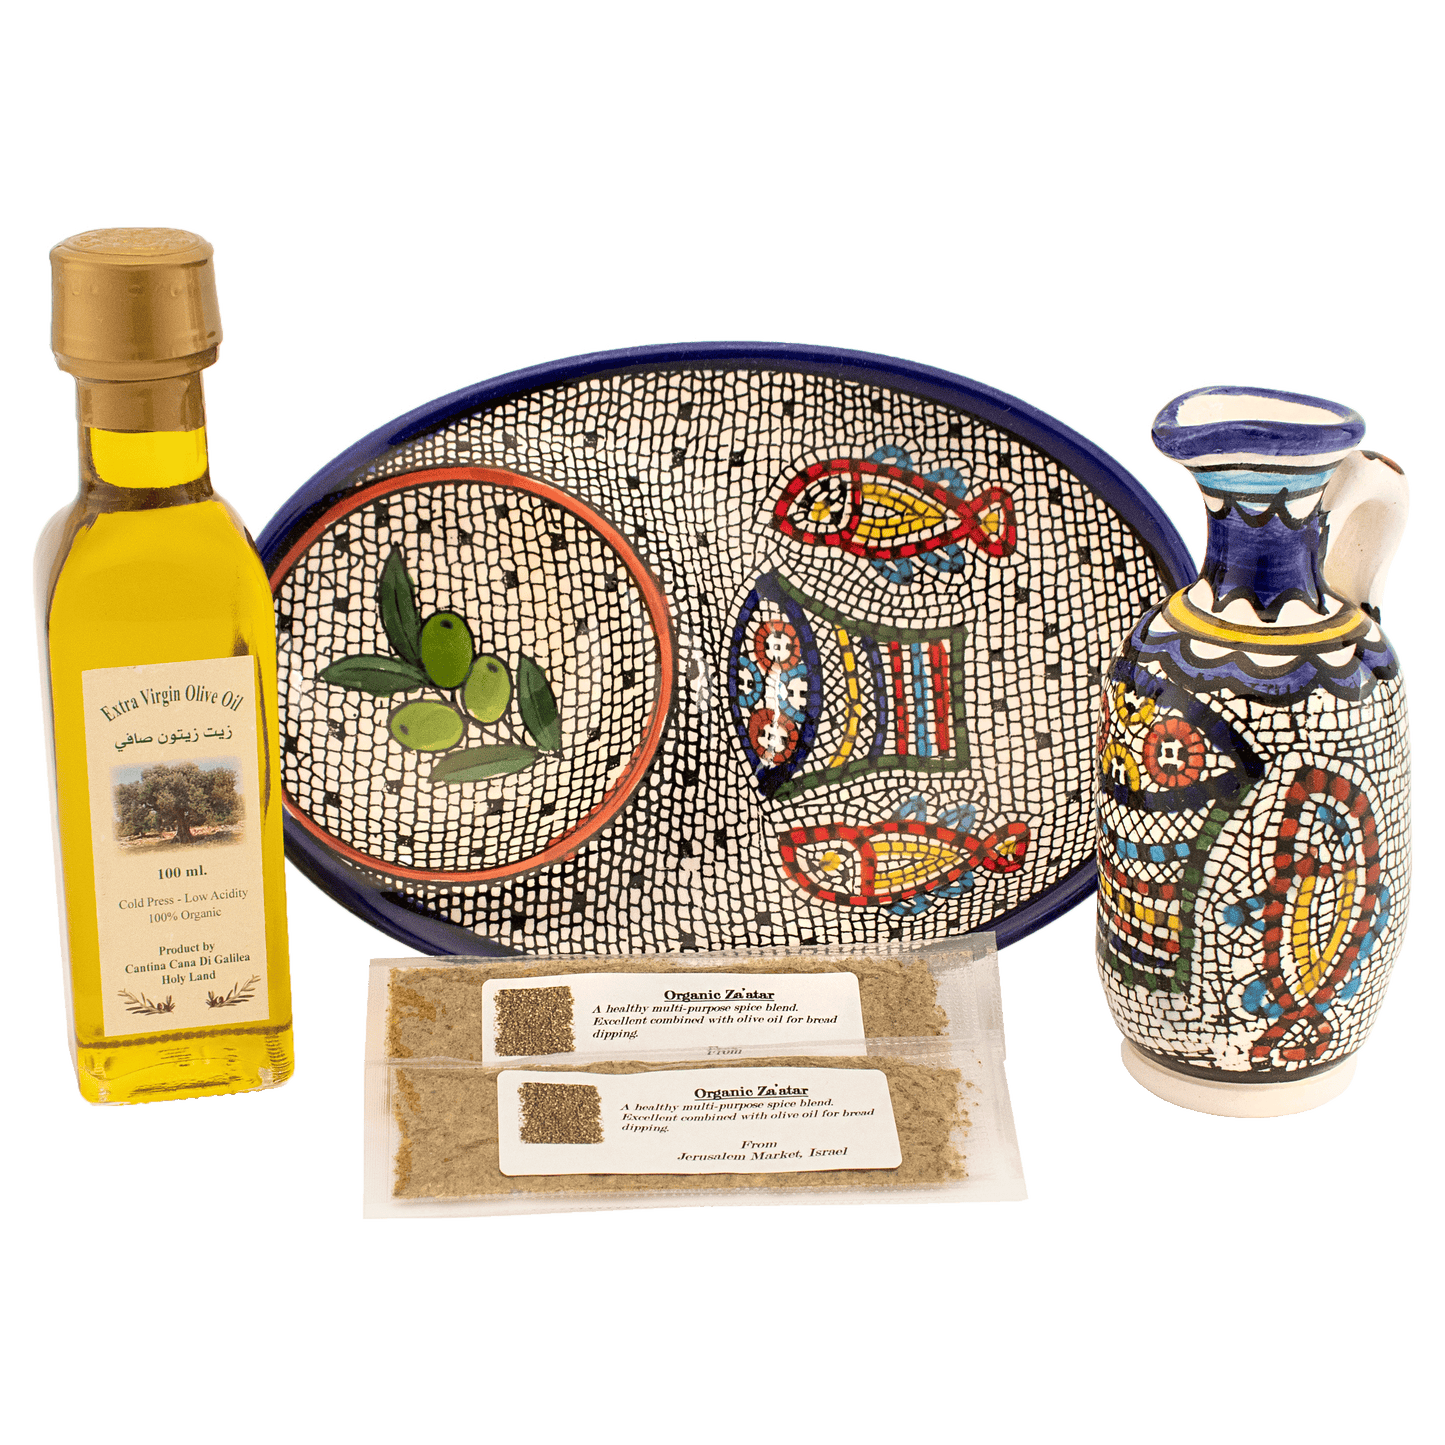 Armenian Dipping dish set with Fish and Loves and olive branch designs, olive oil, and 2 sample Za'atar spice packets